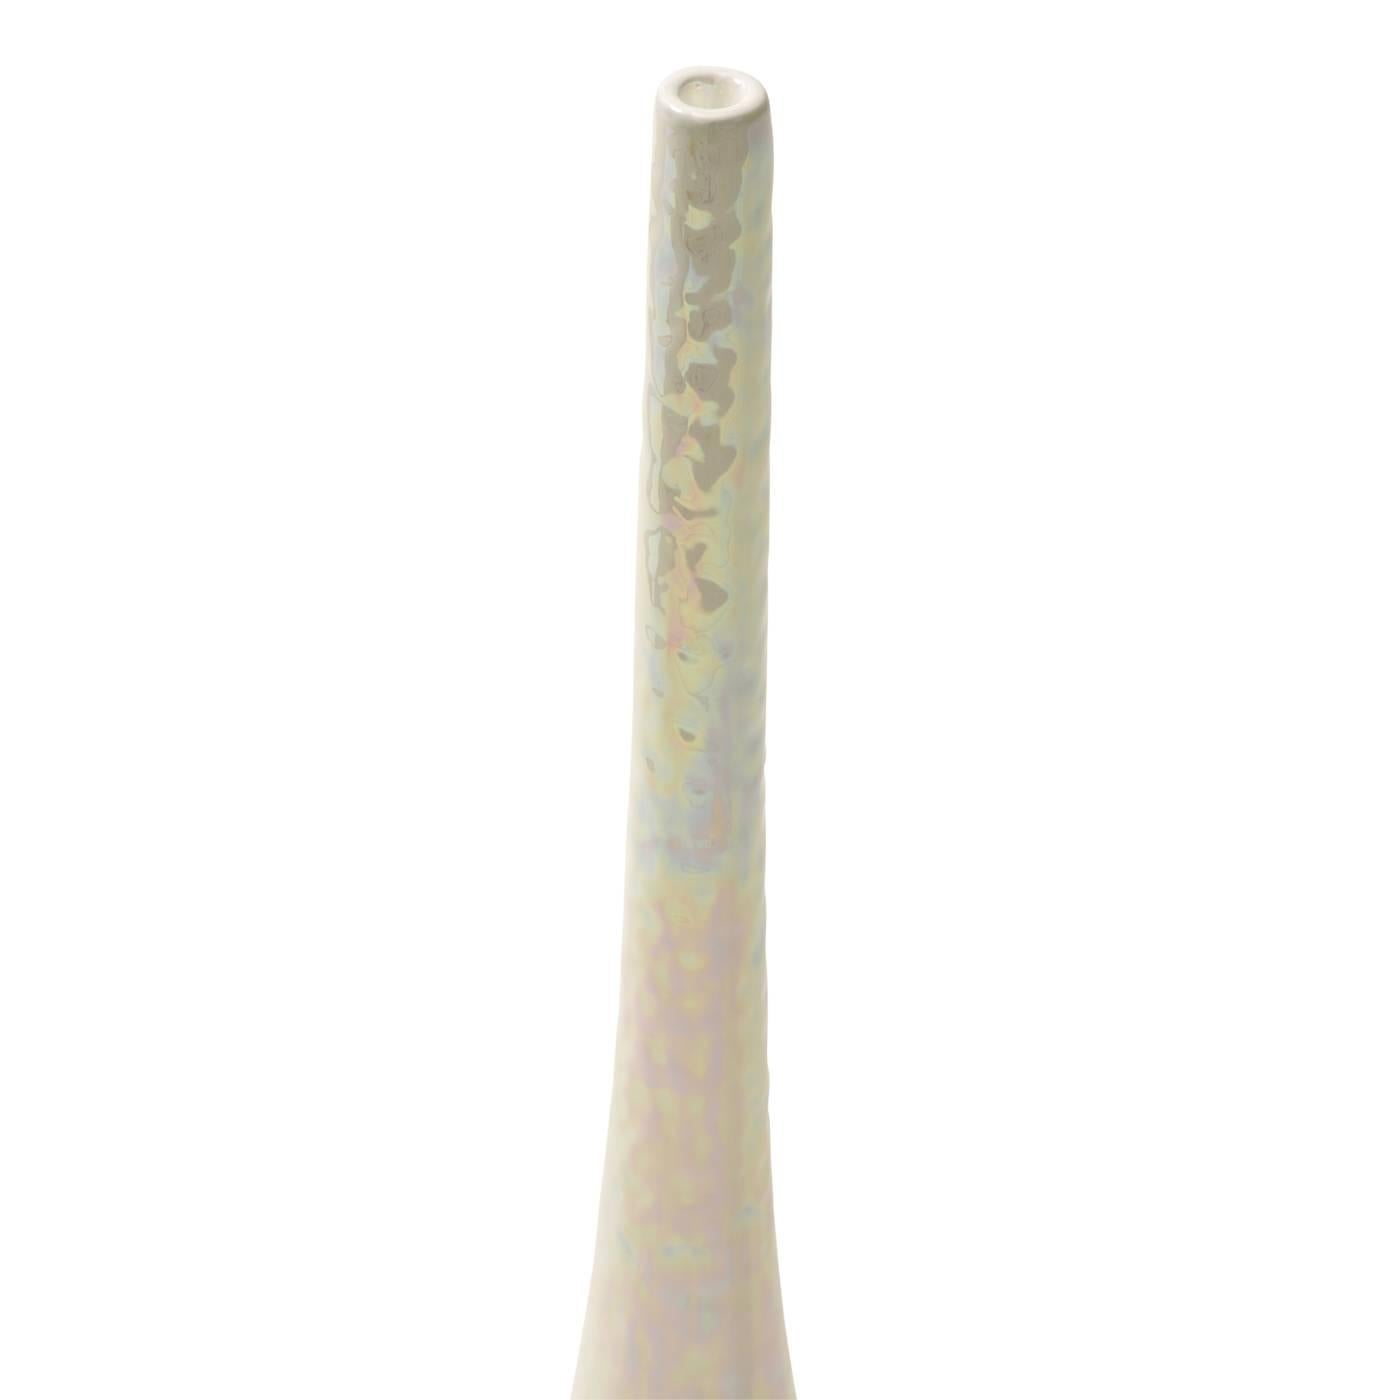 This candlestick is a sophisticated modern décor piece by Ceramica Gatti. After the molding and the first firing, the maiolica is hand-painted in pearl white, and then fired for the second time. The piece is finished with a mother-of- pearl luster